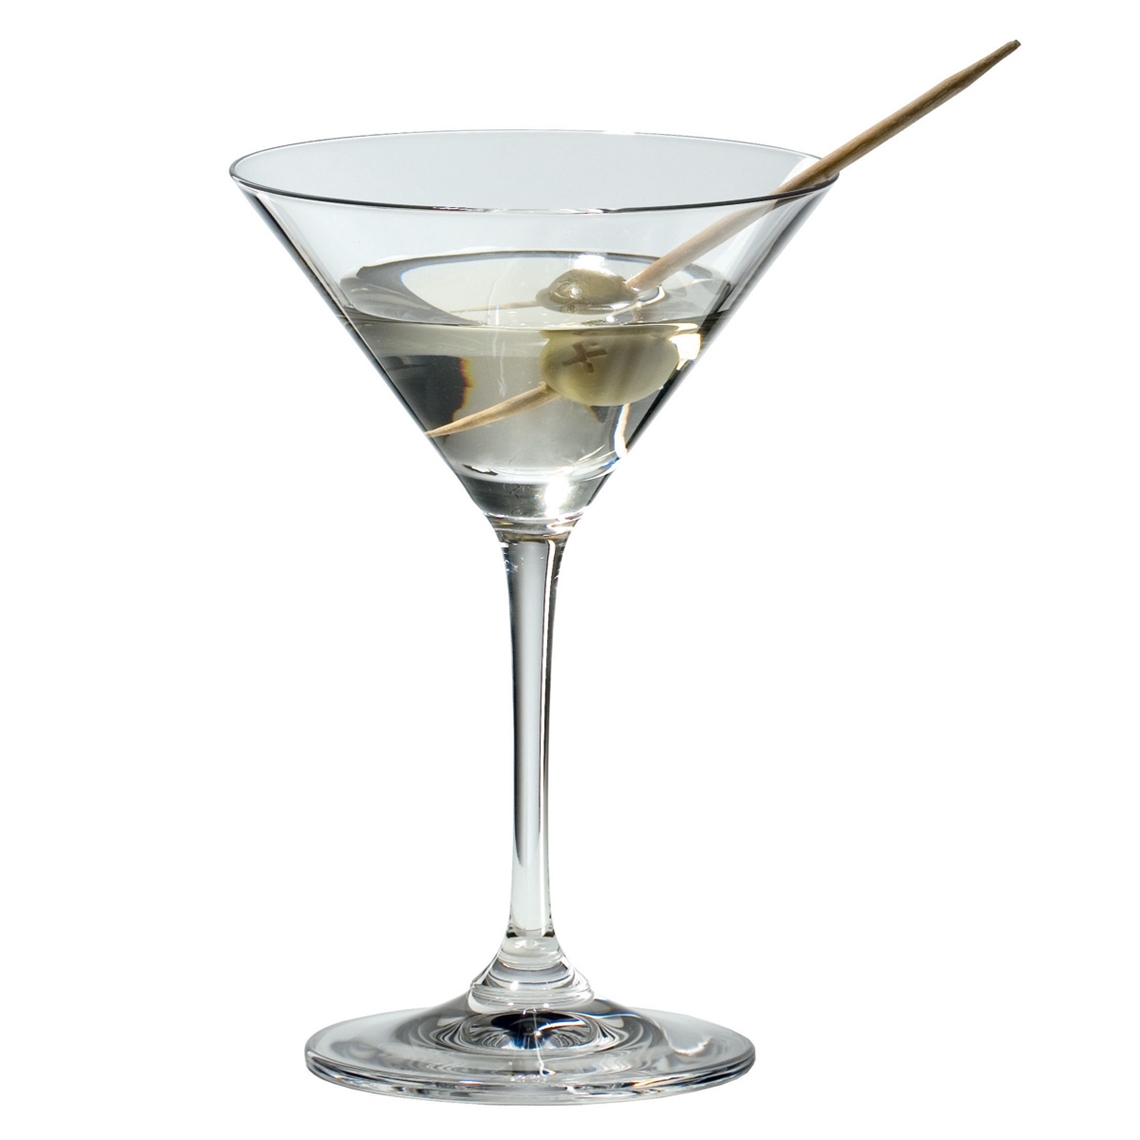 View more mark thomas from our Martini Glasses range